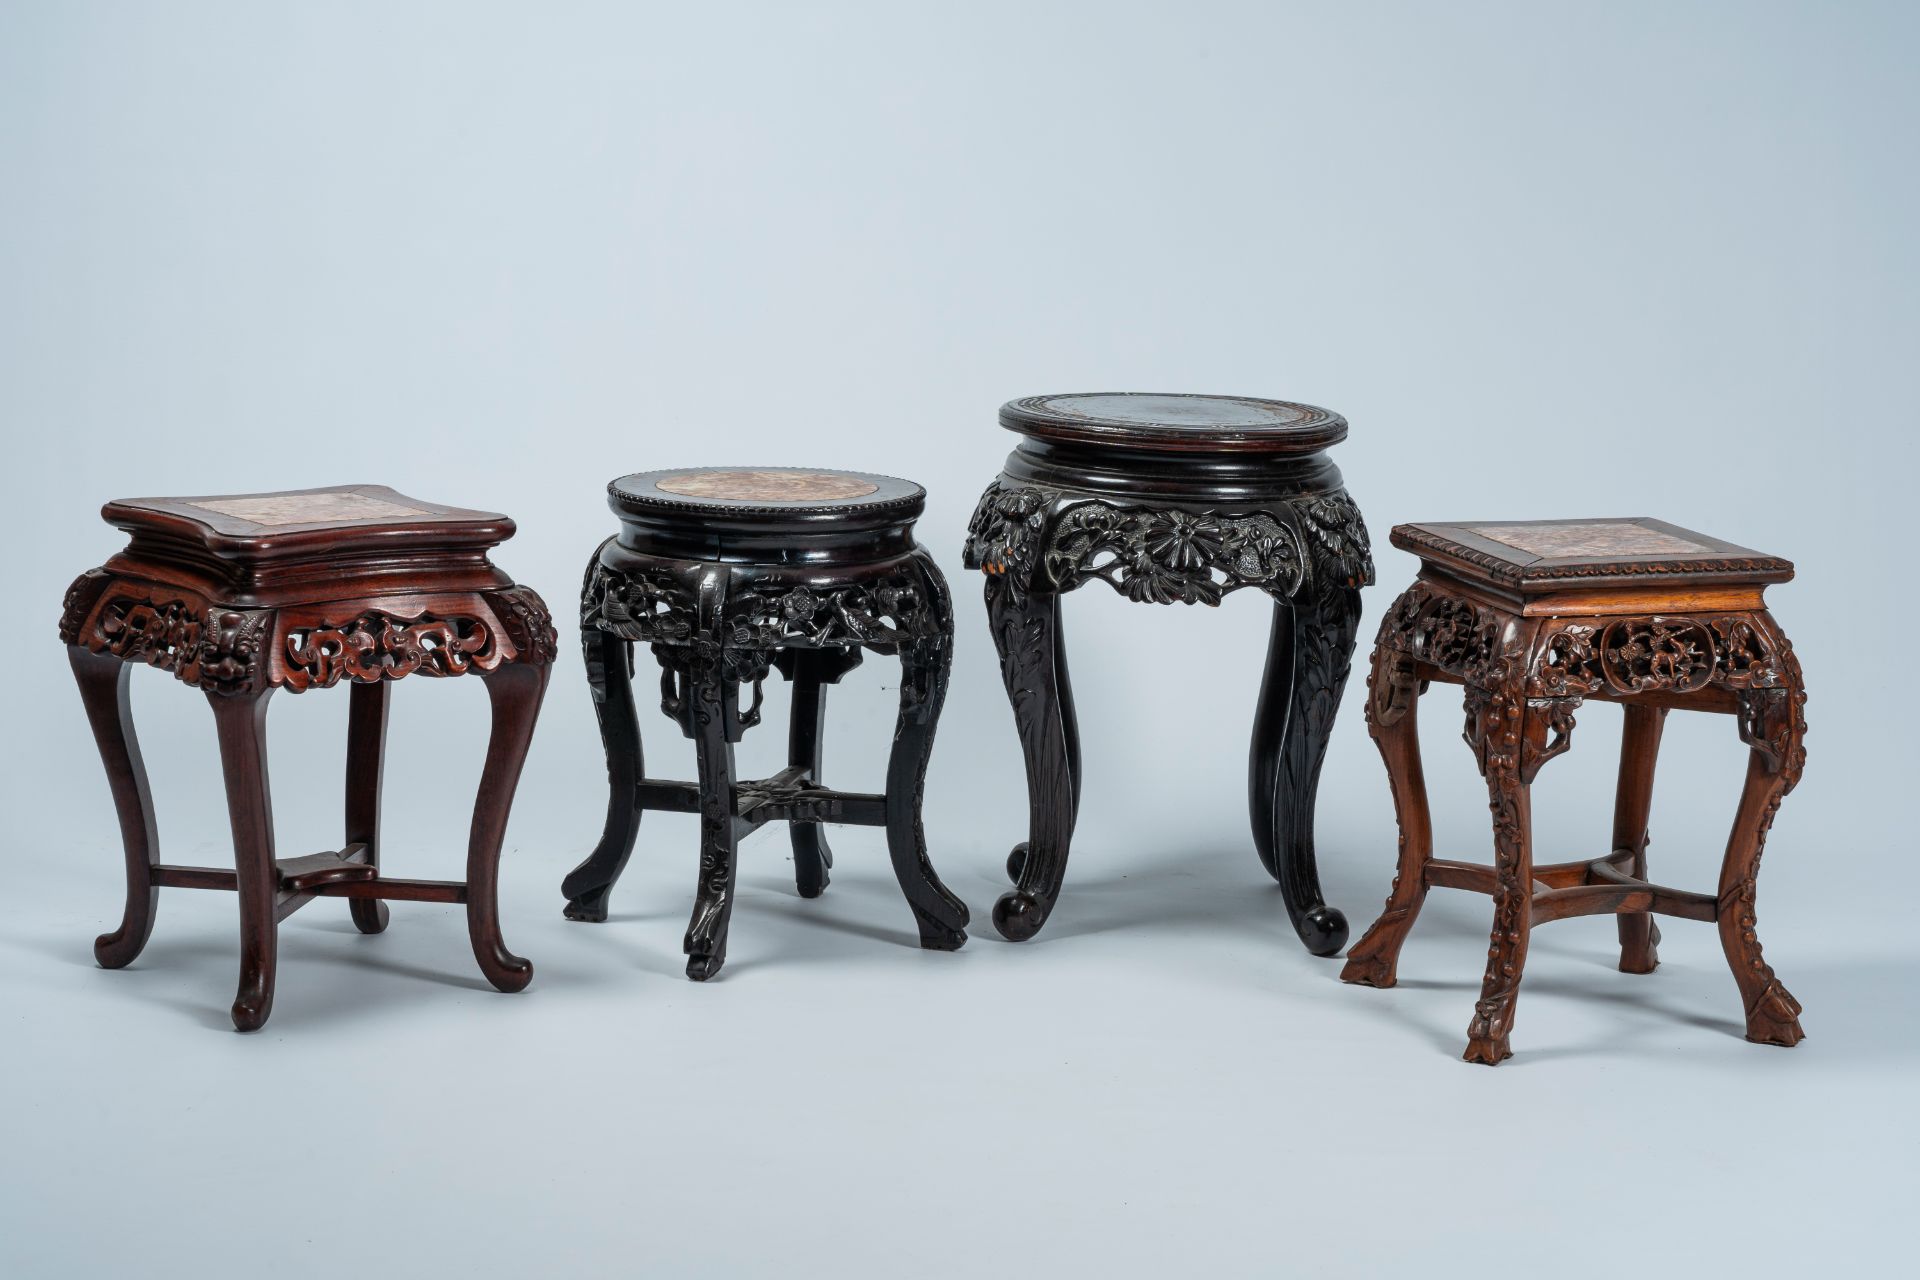 Four Chinese and Japanese open worked carved wood stands with marble and wood top, 20th C.